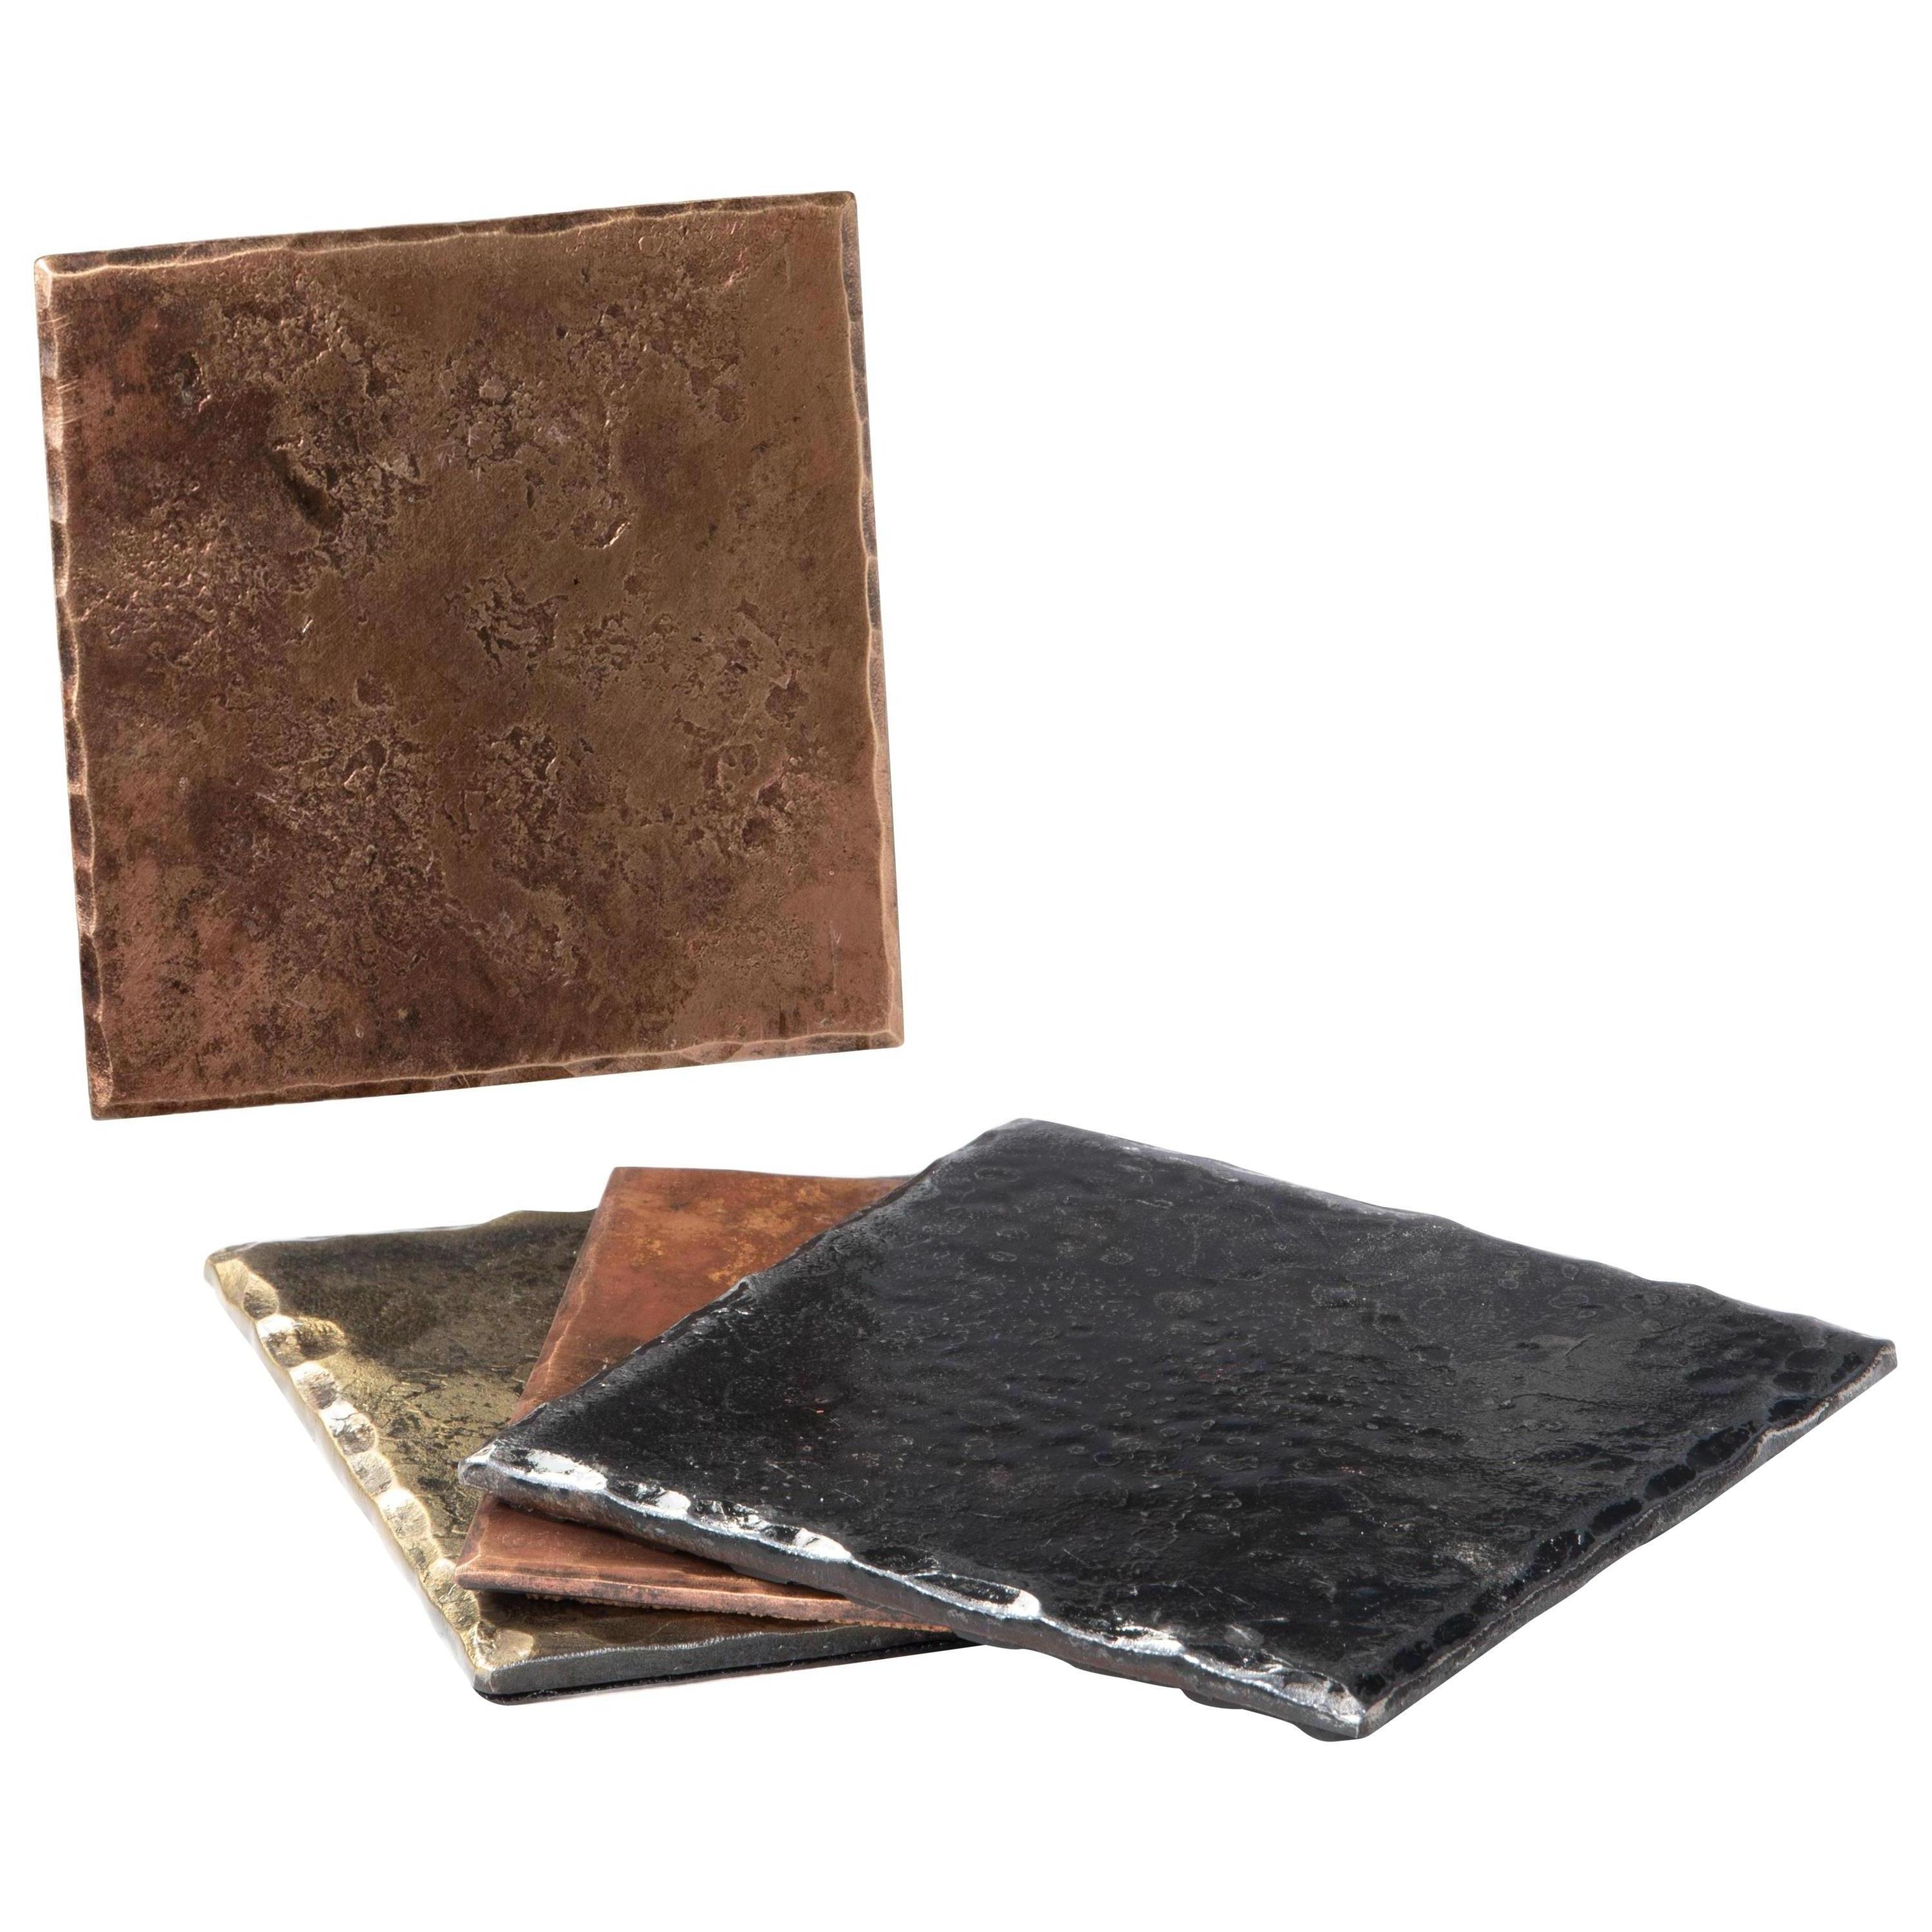 A handcrafted, square coaster made from bronze that has been forge textured over a rough steel anvil face to provide texture. The edges are hammered and beveled, and the bronze is burnished to accentuate the forged details. A glossy clear coat